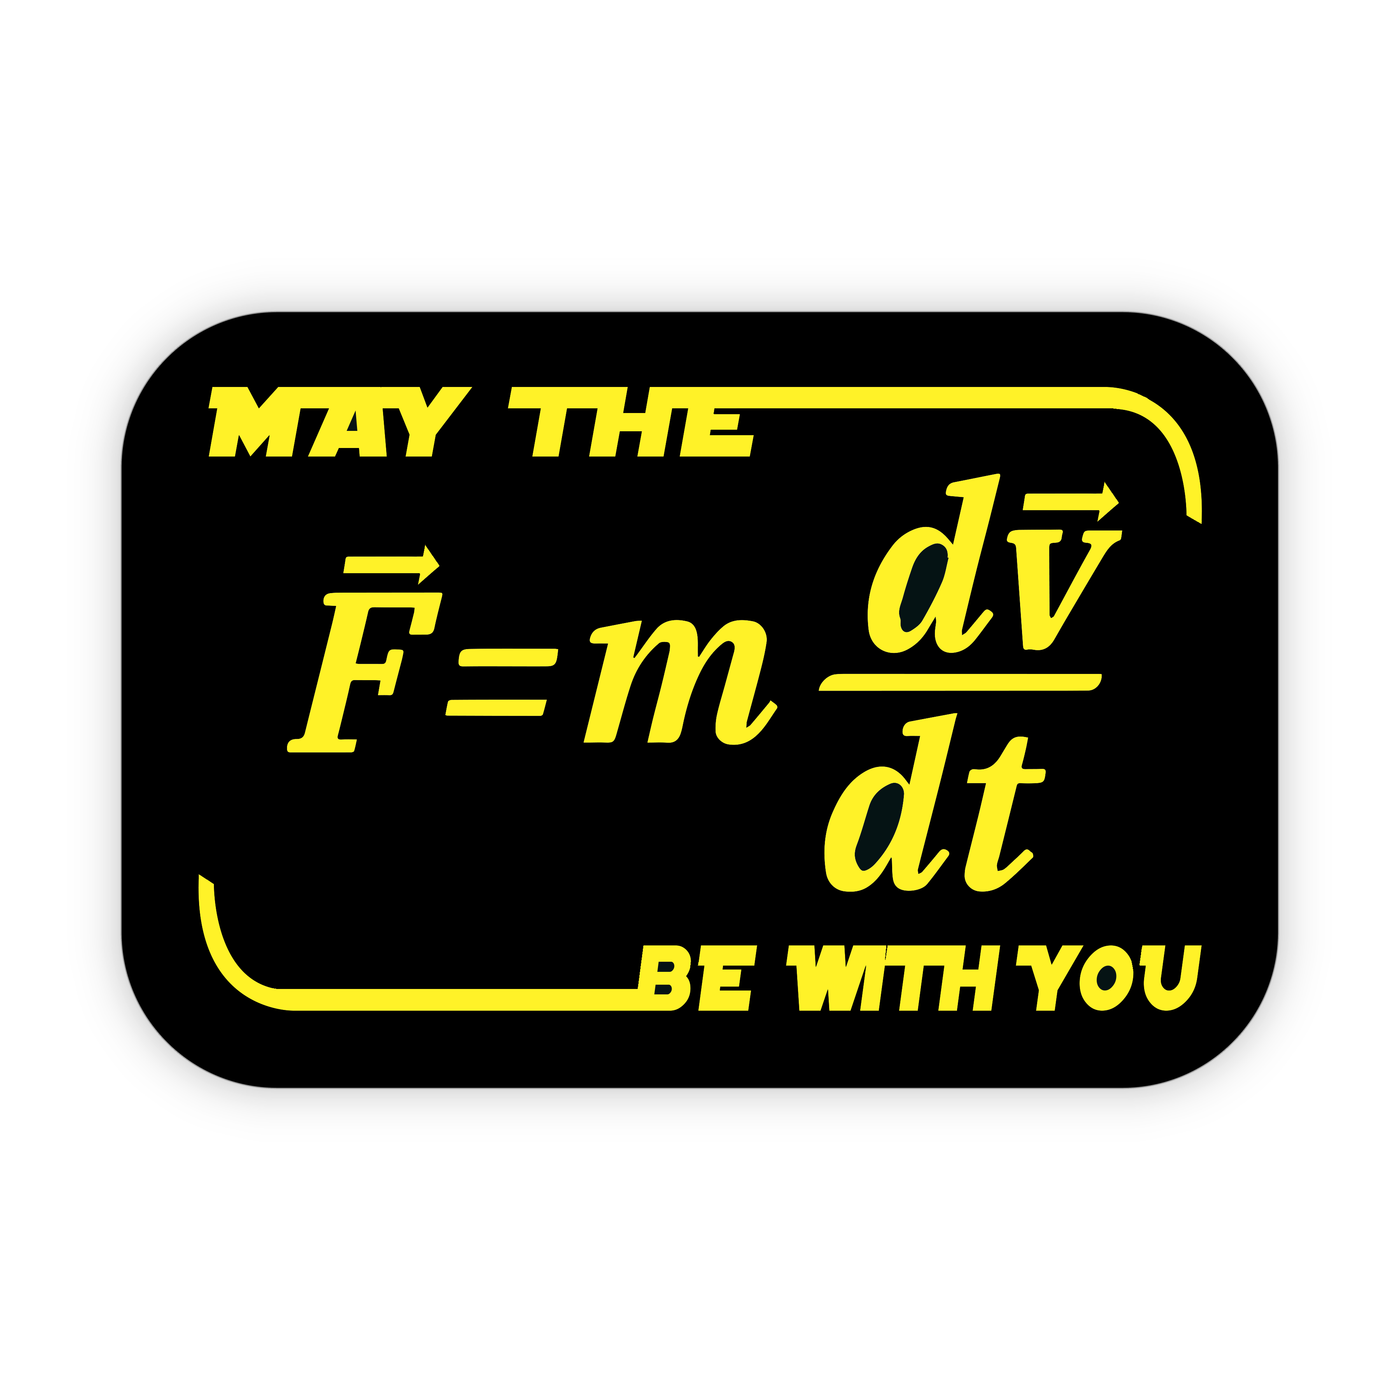 May the Force be With You - Vinyl Sticker